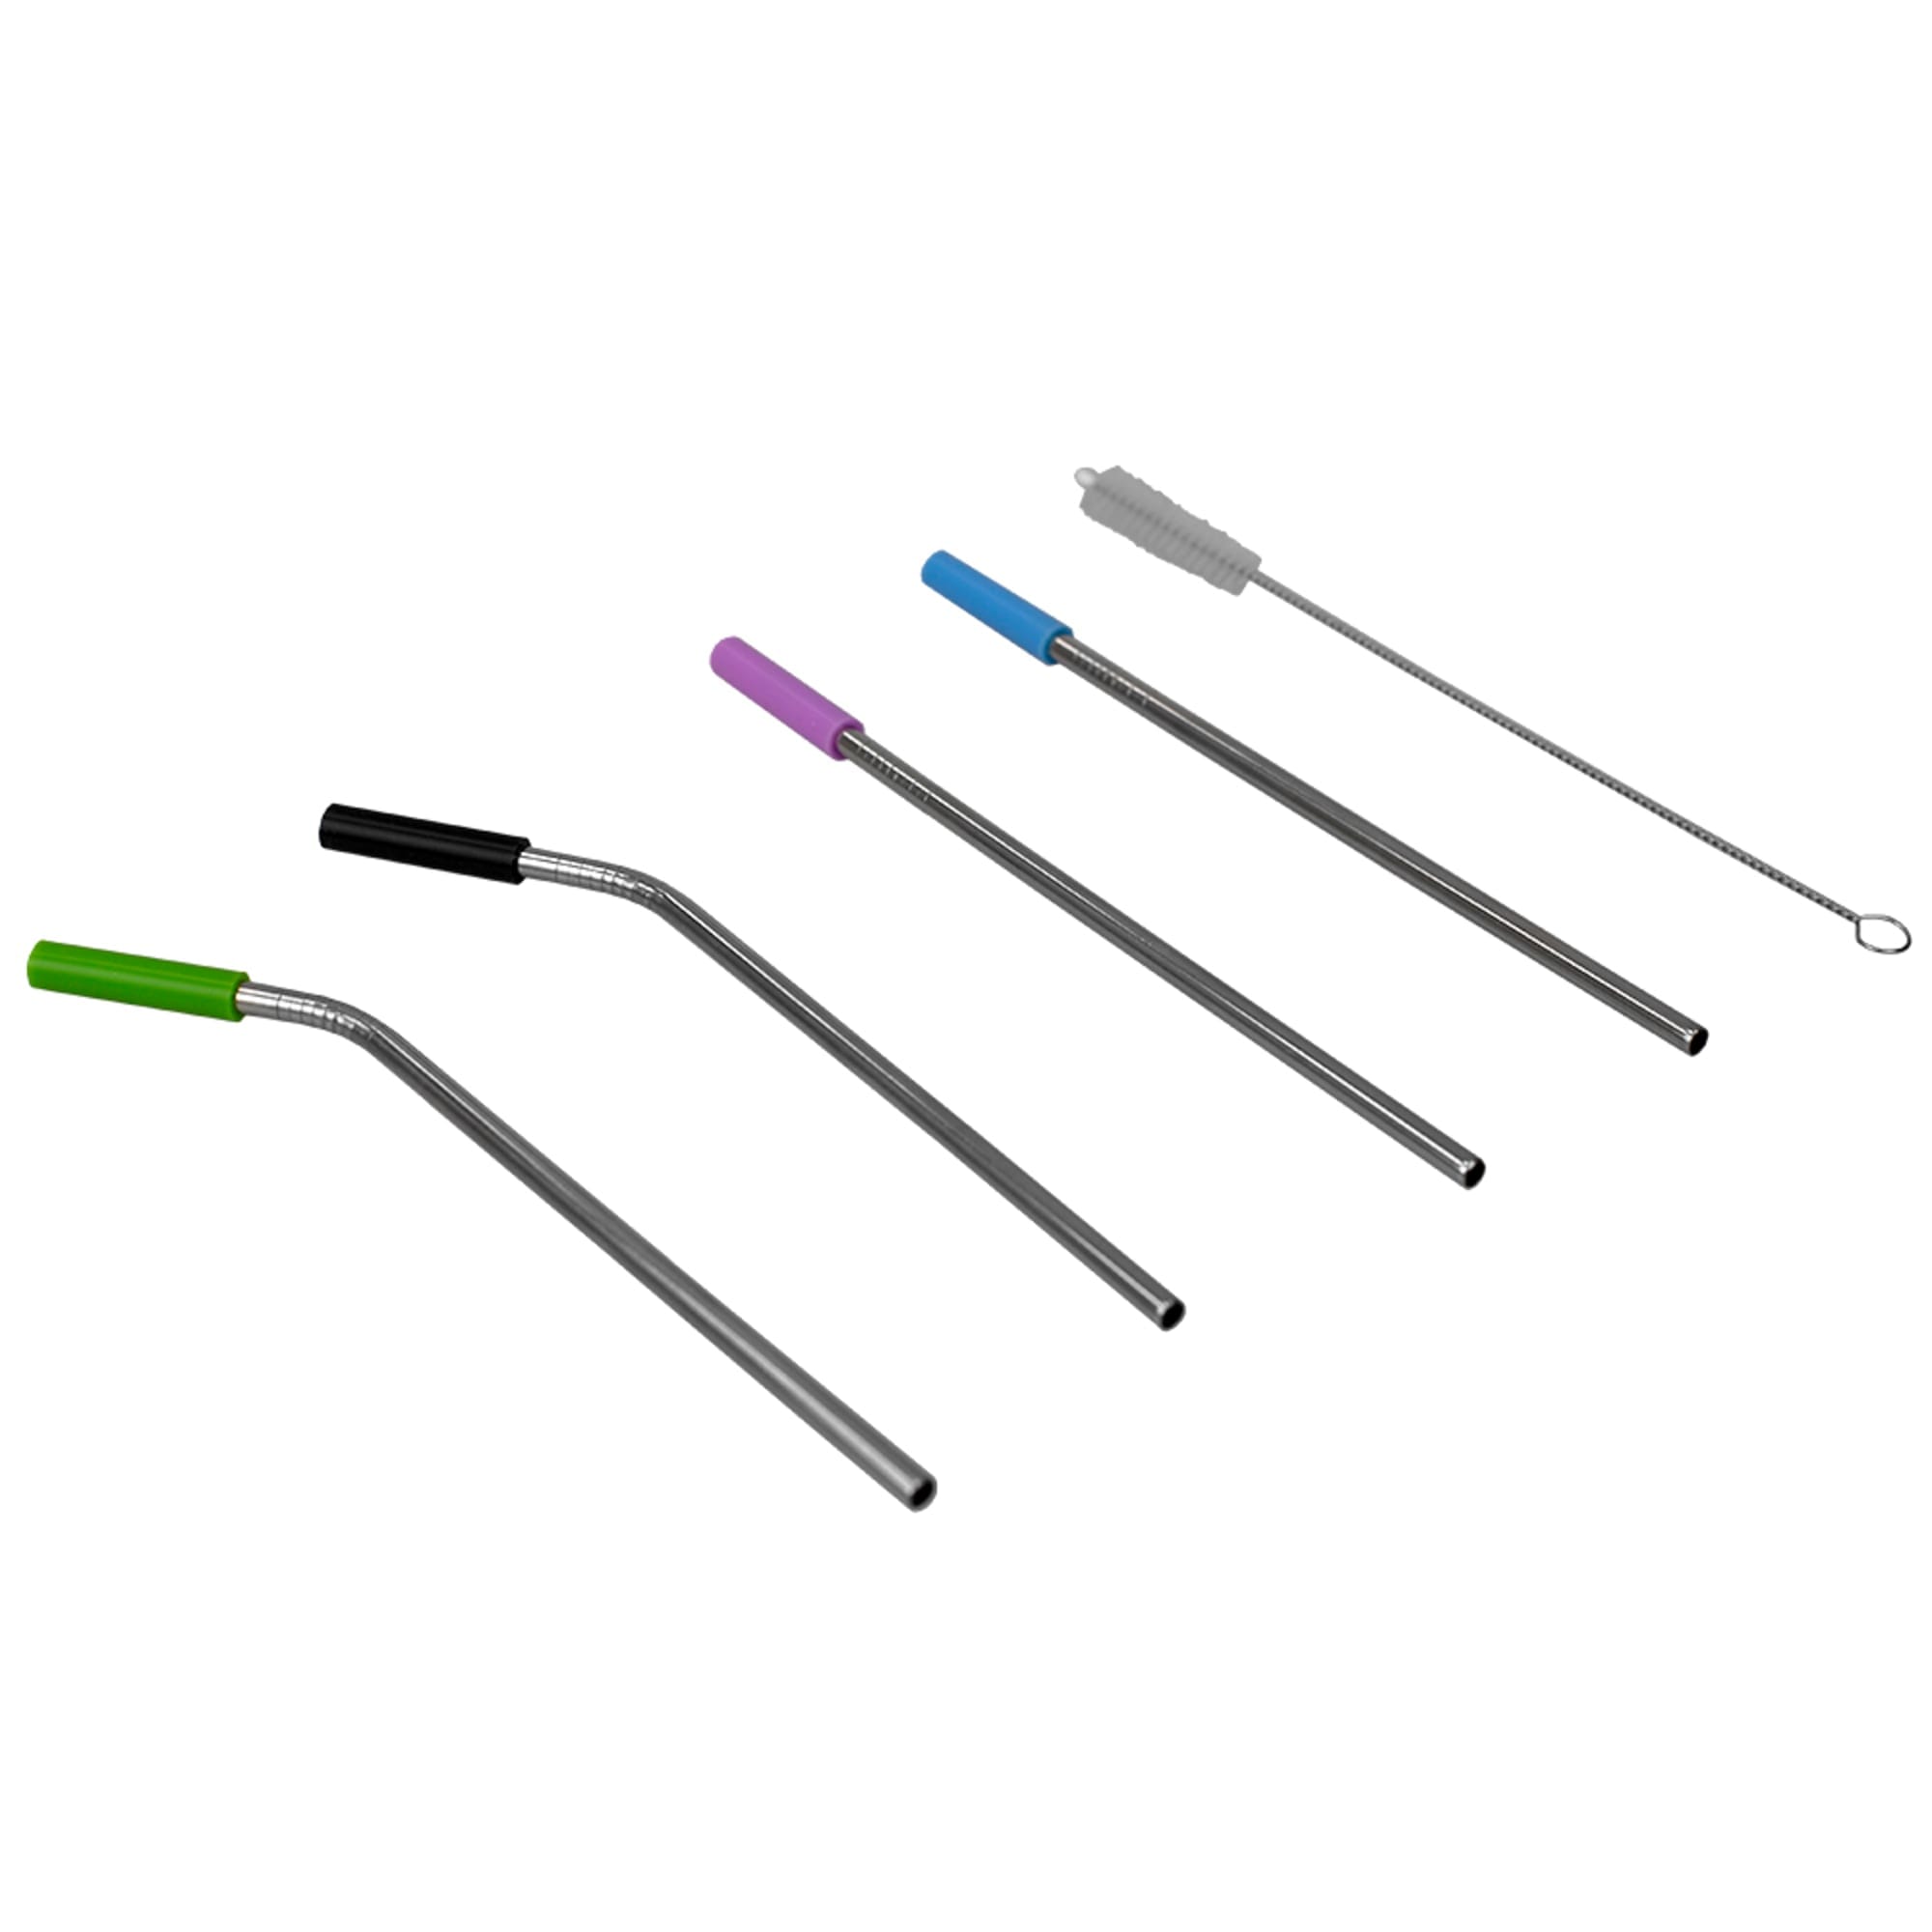 Home Basics Soft Silicone Tip Stainless Steel Straw Set, Multi-color, (Pack of 5) $2 EACH, CASE PACK OF 24